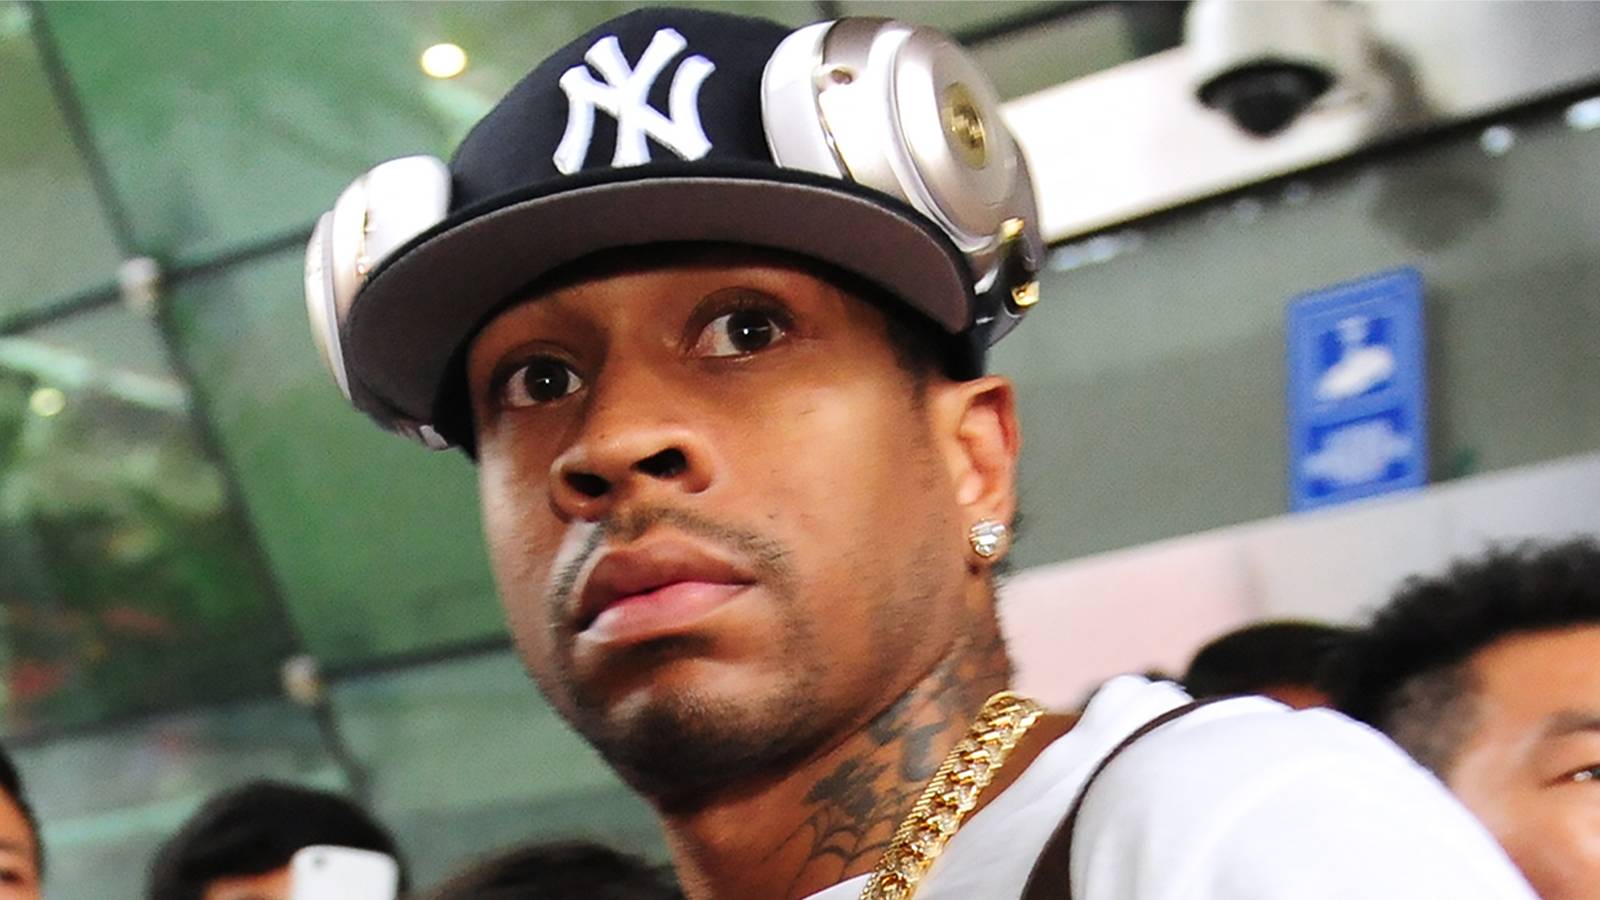 Allen Iverson says he is tired of defending himself, would like to